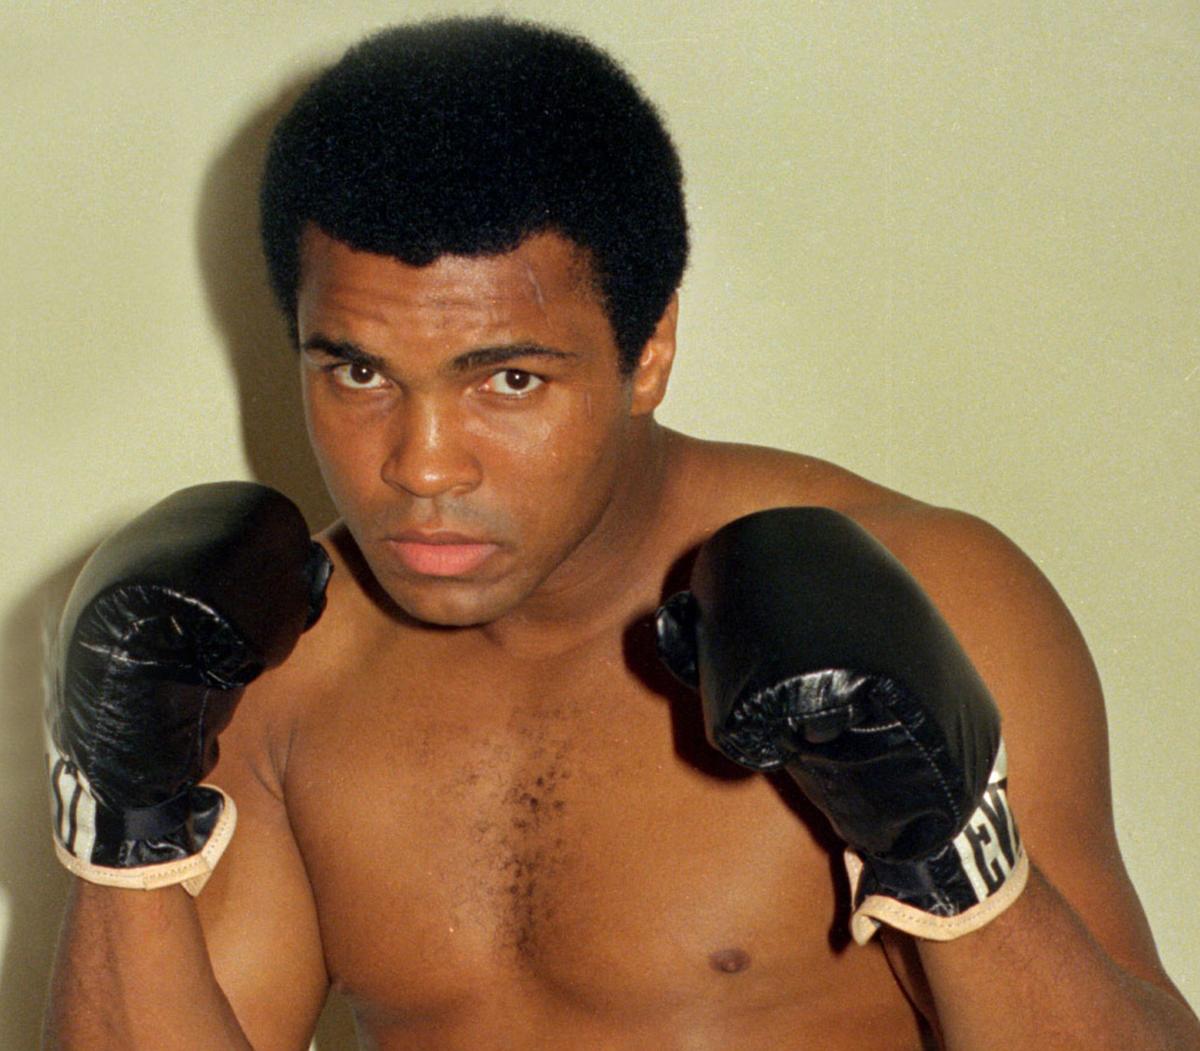 Sports World Honors Muhammad Ali After Boxing Legend Dies at Age 74